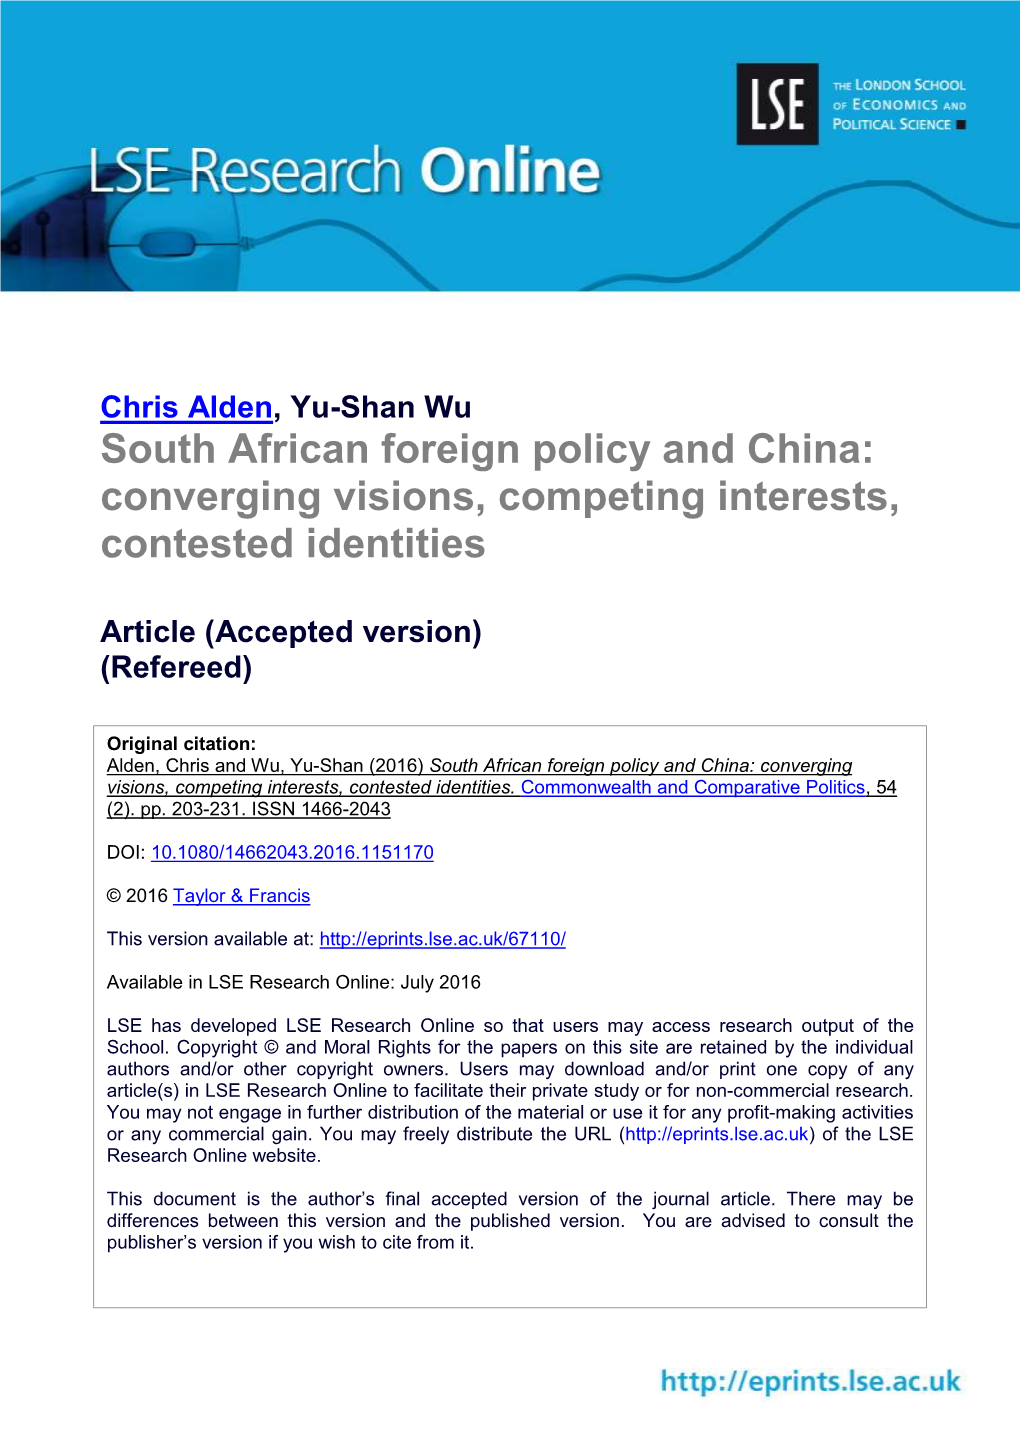 South African Foreign Policy and China: Converging Visions, Competing Interests, Contested Identities